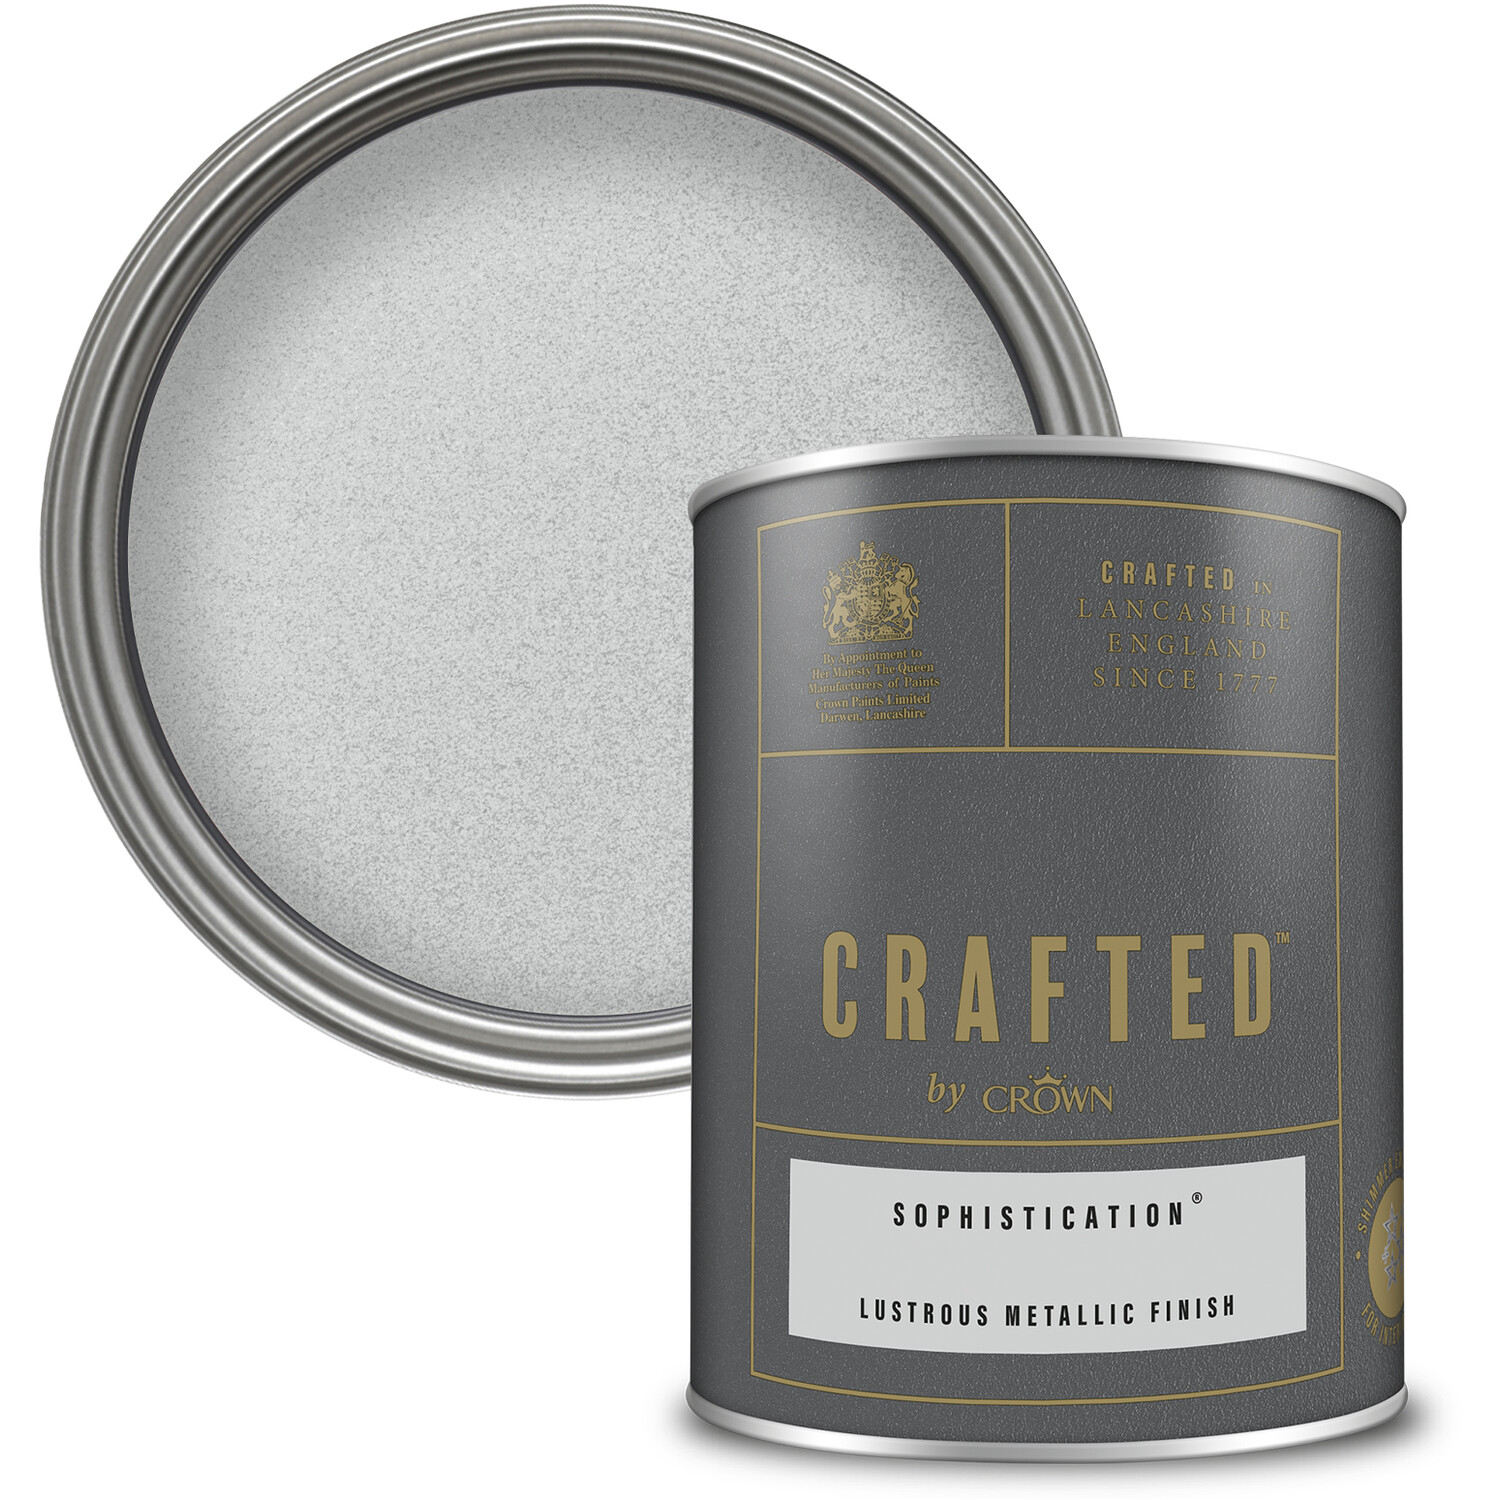 Crown Crafted Walls Wood and Metal Sophistication Lustrous Metallic Shimmer Emulsion Paint 1.25L Image 1